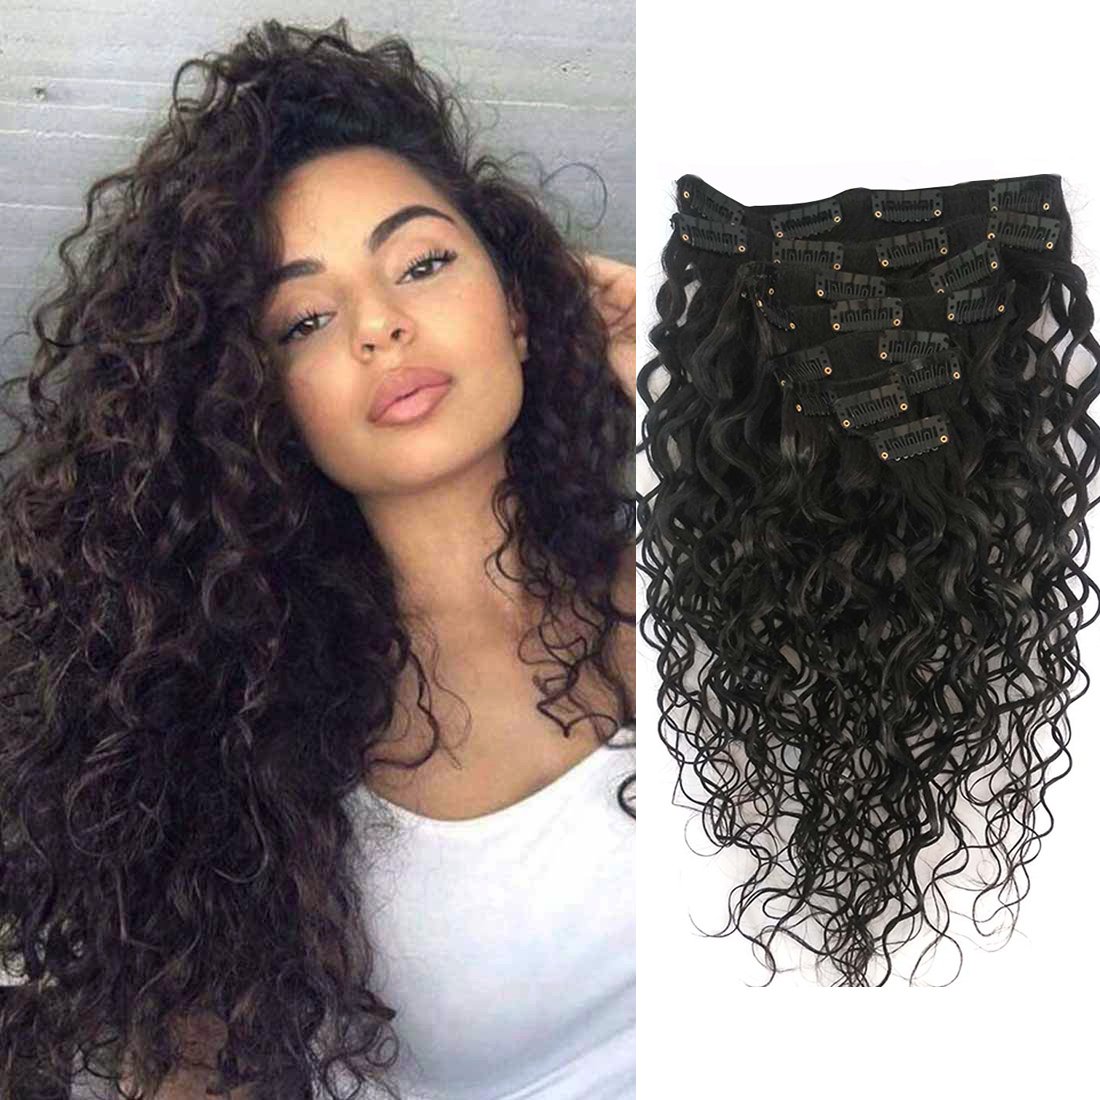 Doren Deep Curly Clip In Human Hair Extensions for Women 8Pcs 20Clips 120g  8A Virgin Remy Brazilian Wavy Curly Hair Natural Color 16 Inches 16 Inch  Deep Curly